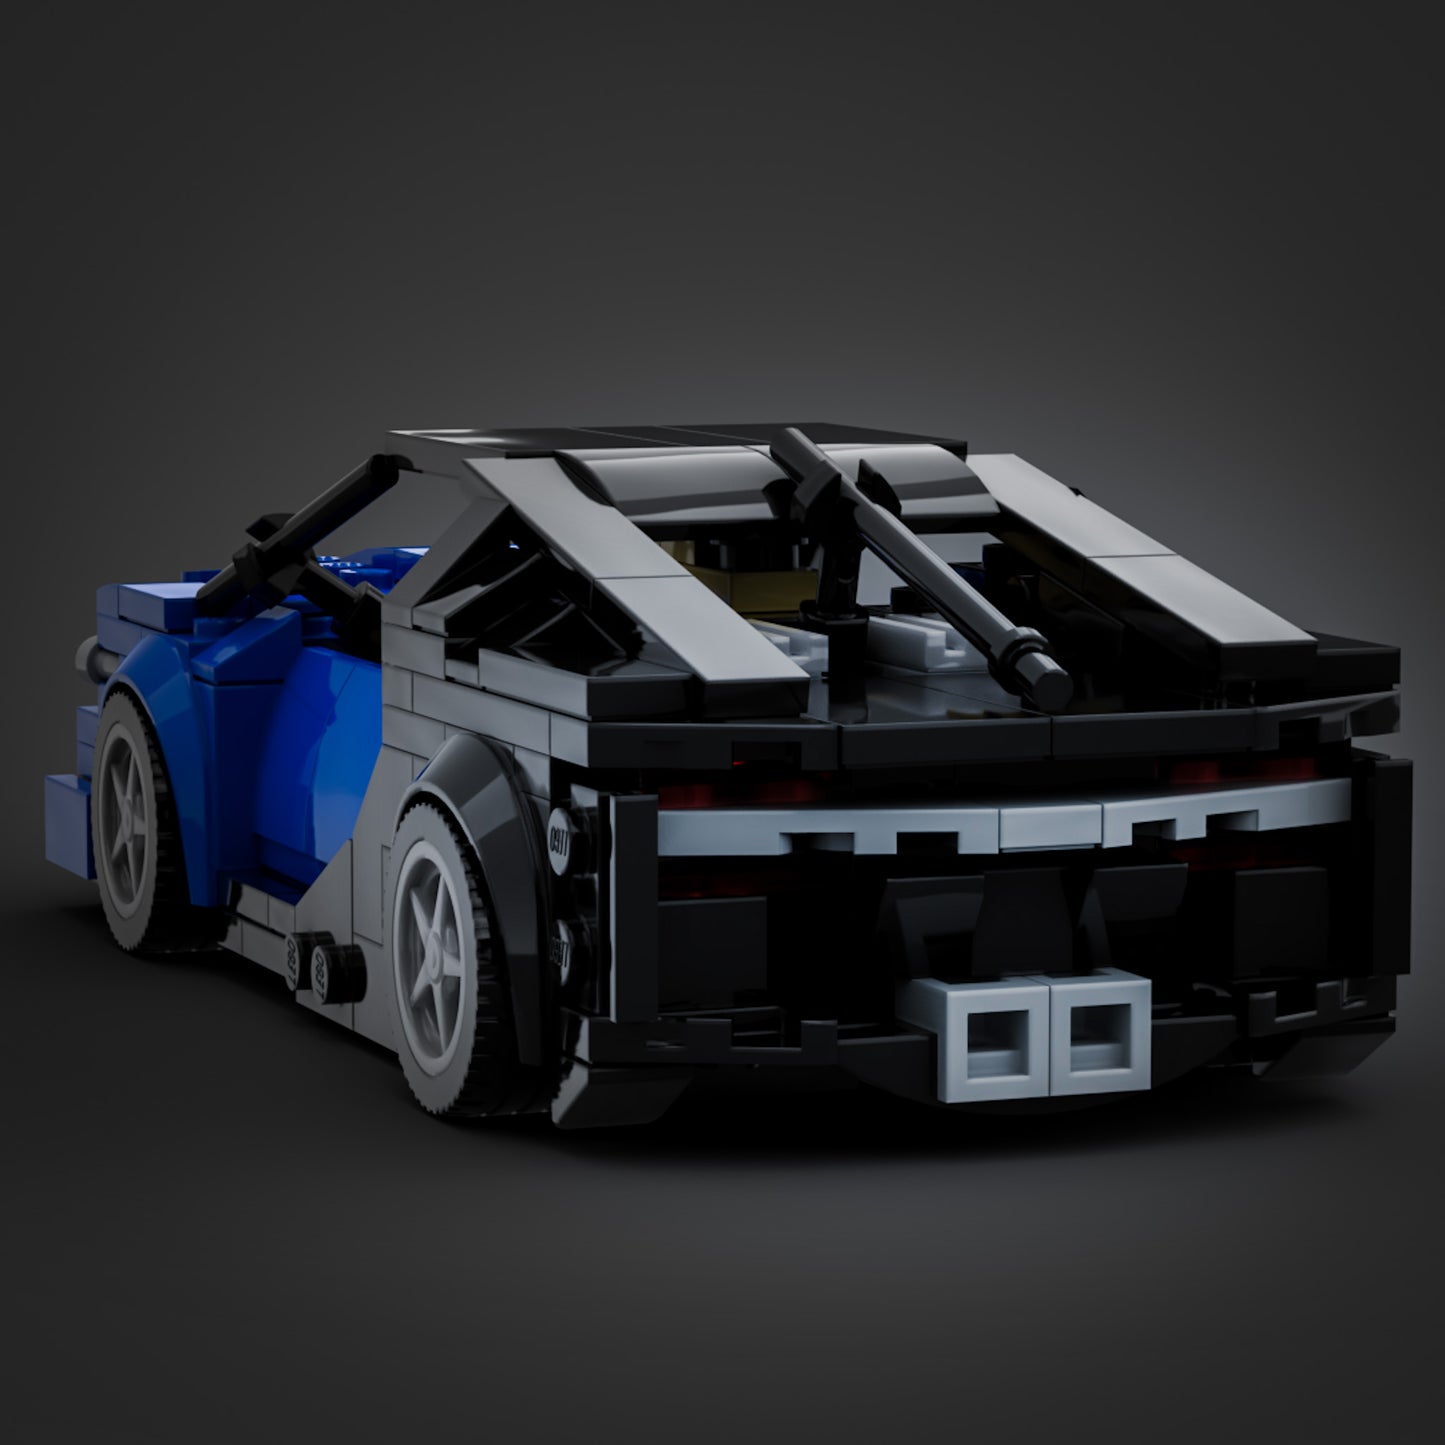 Inspired by Bugatti Chiron - Blue & Black (instructions)